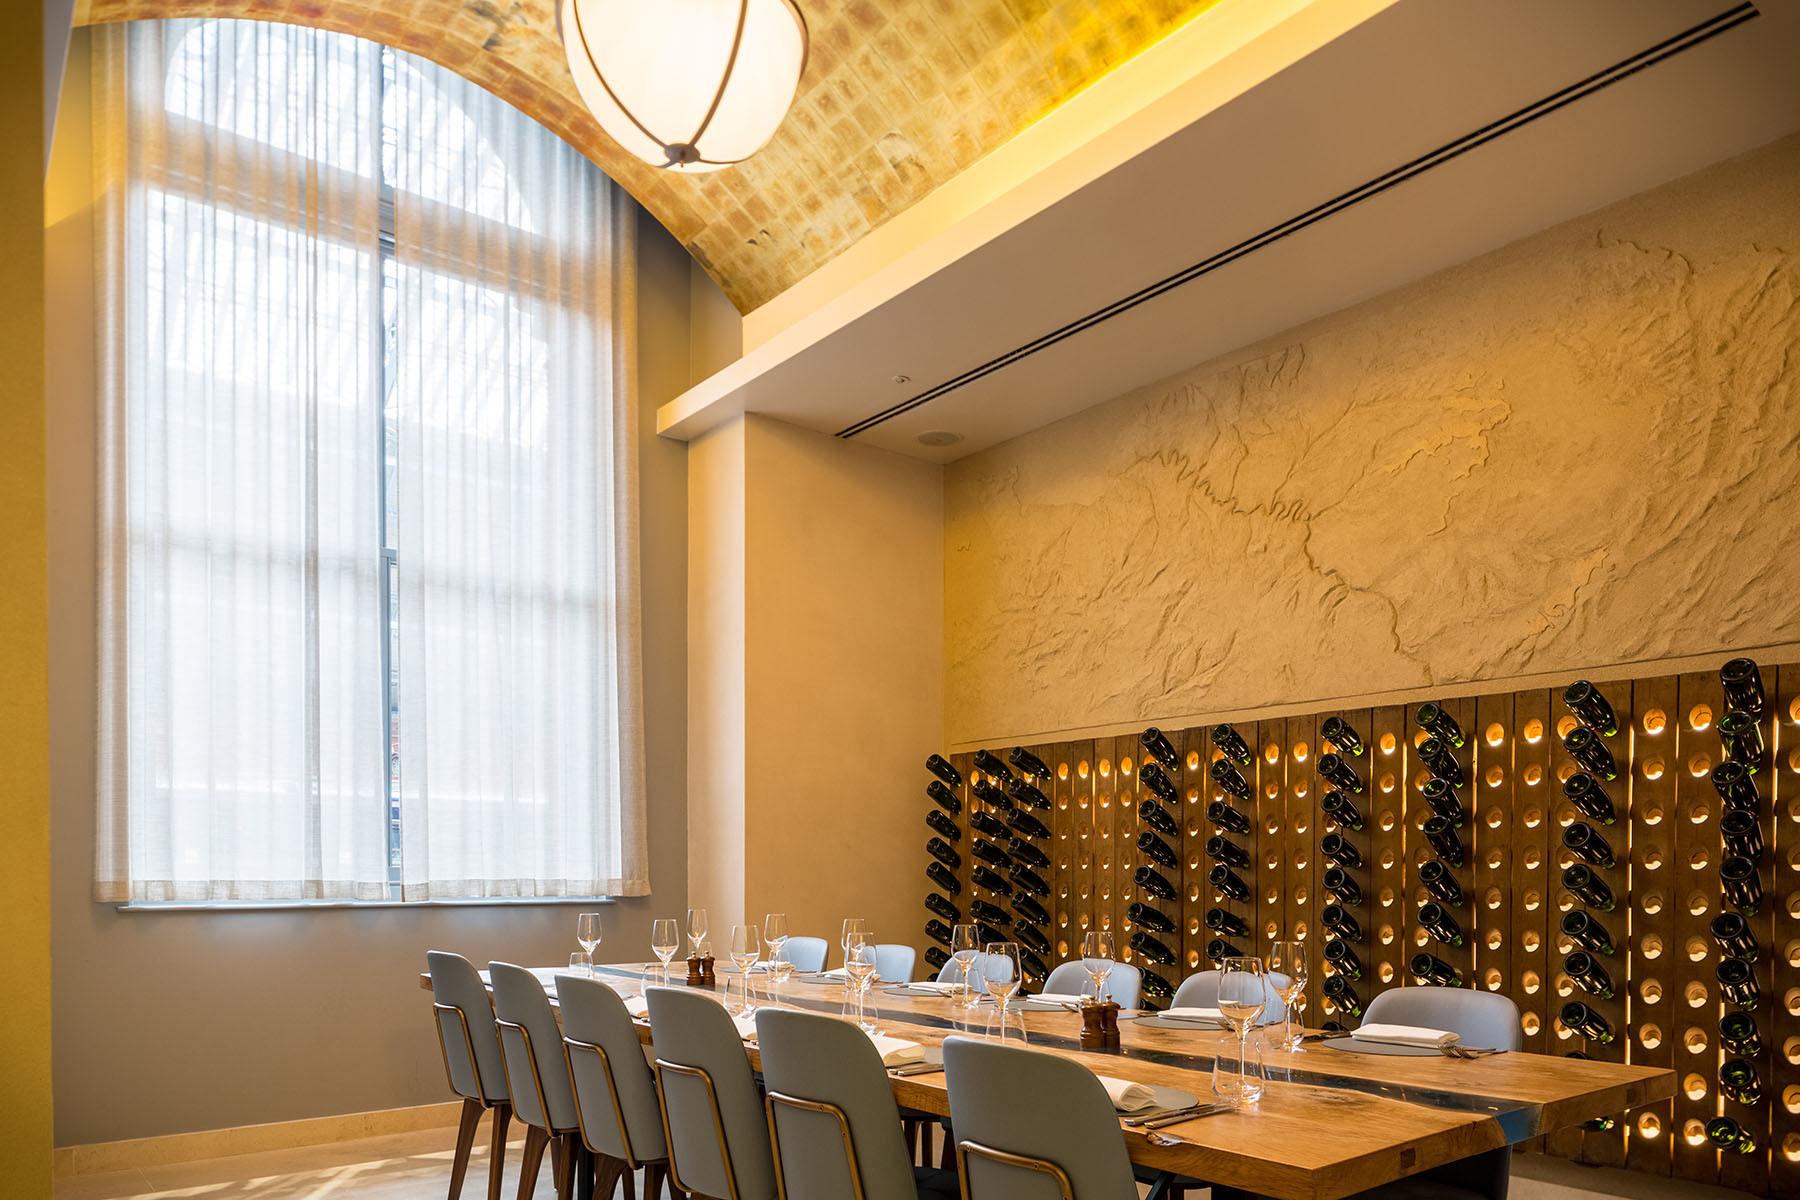 St Pancras Brasserie & Champagne Bar By Searcys, The Tasting Room photo #1